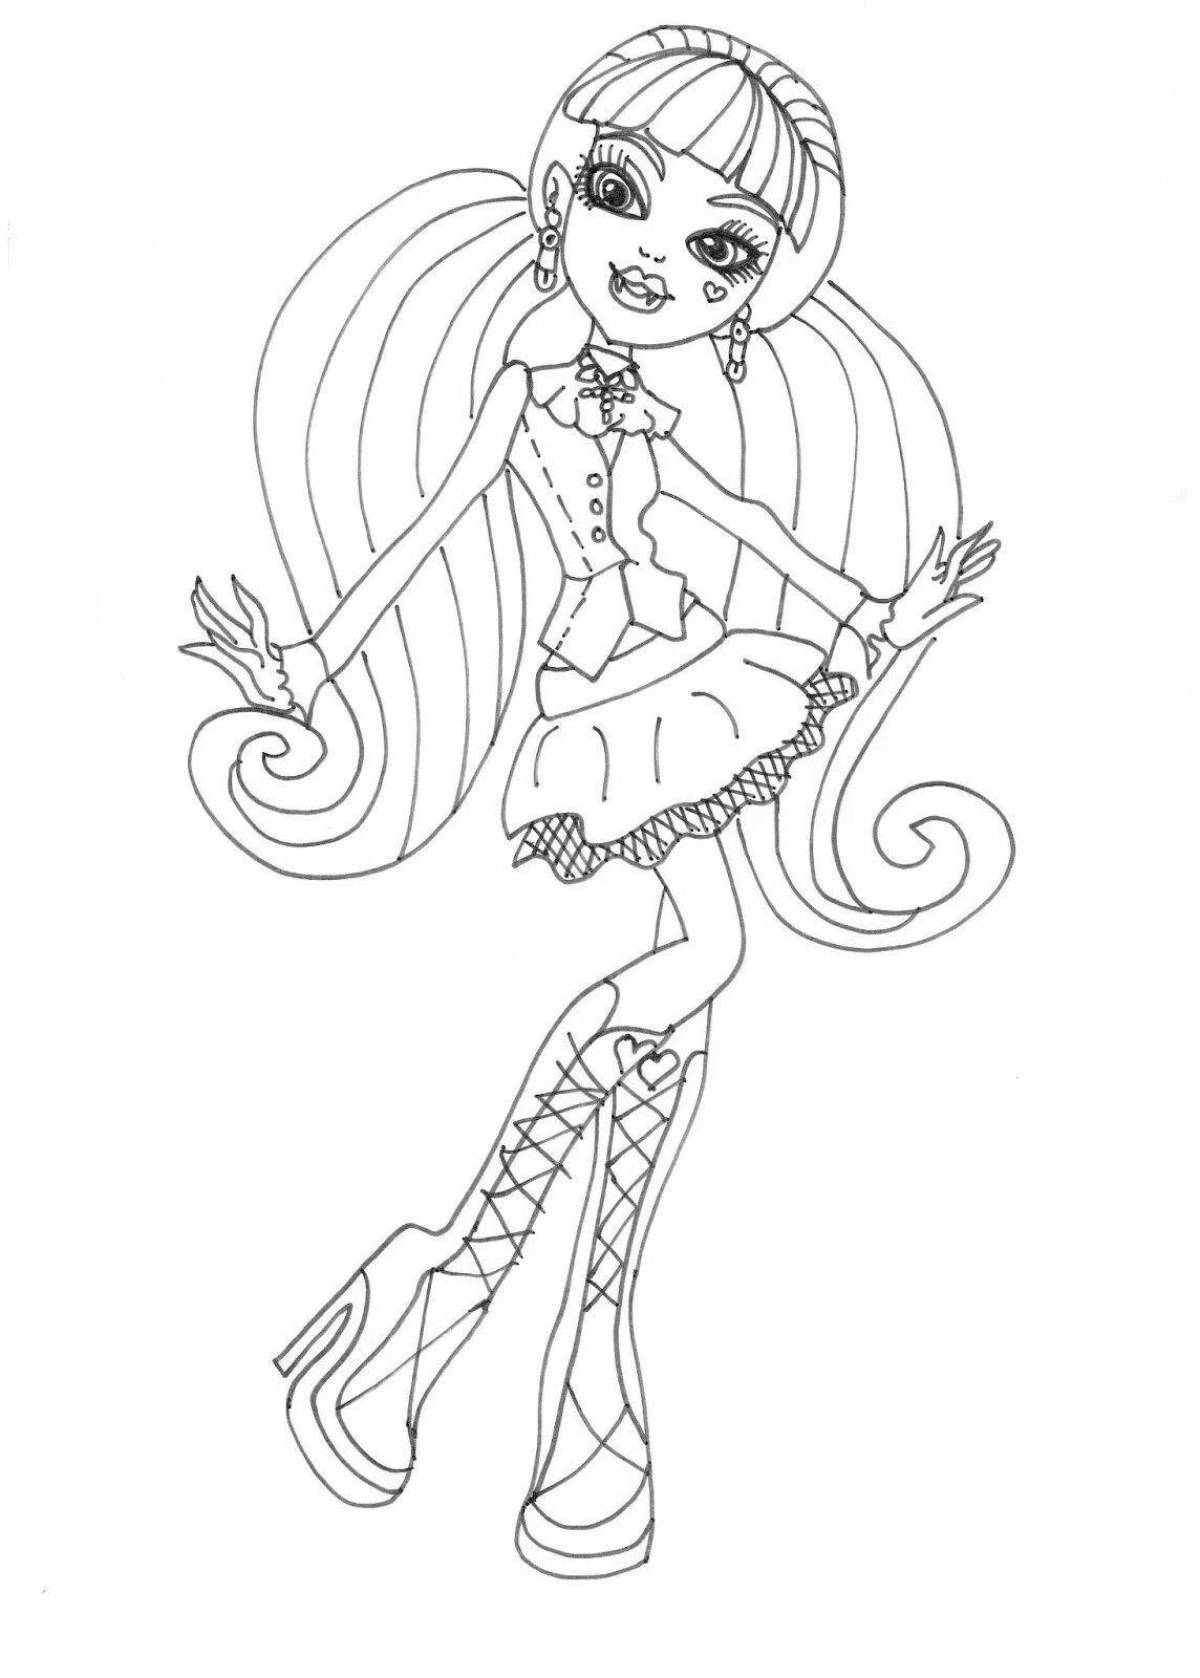 Draculaura awesome coloring book